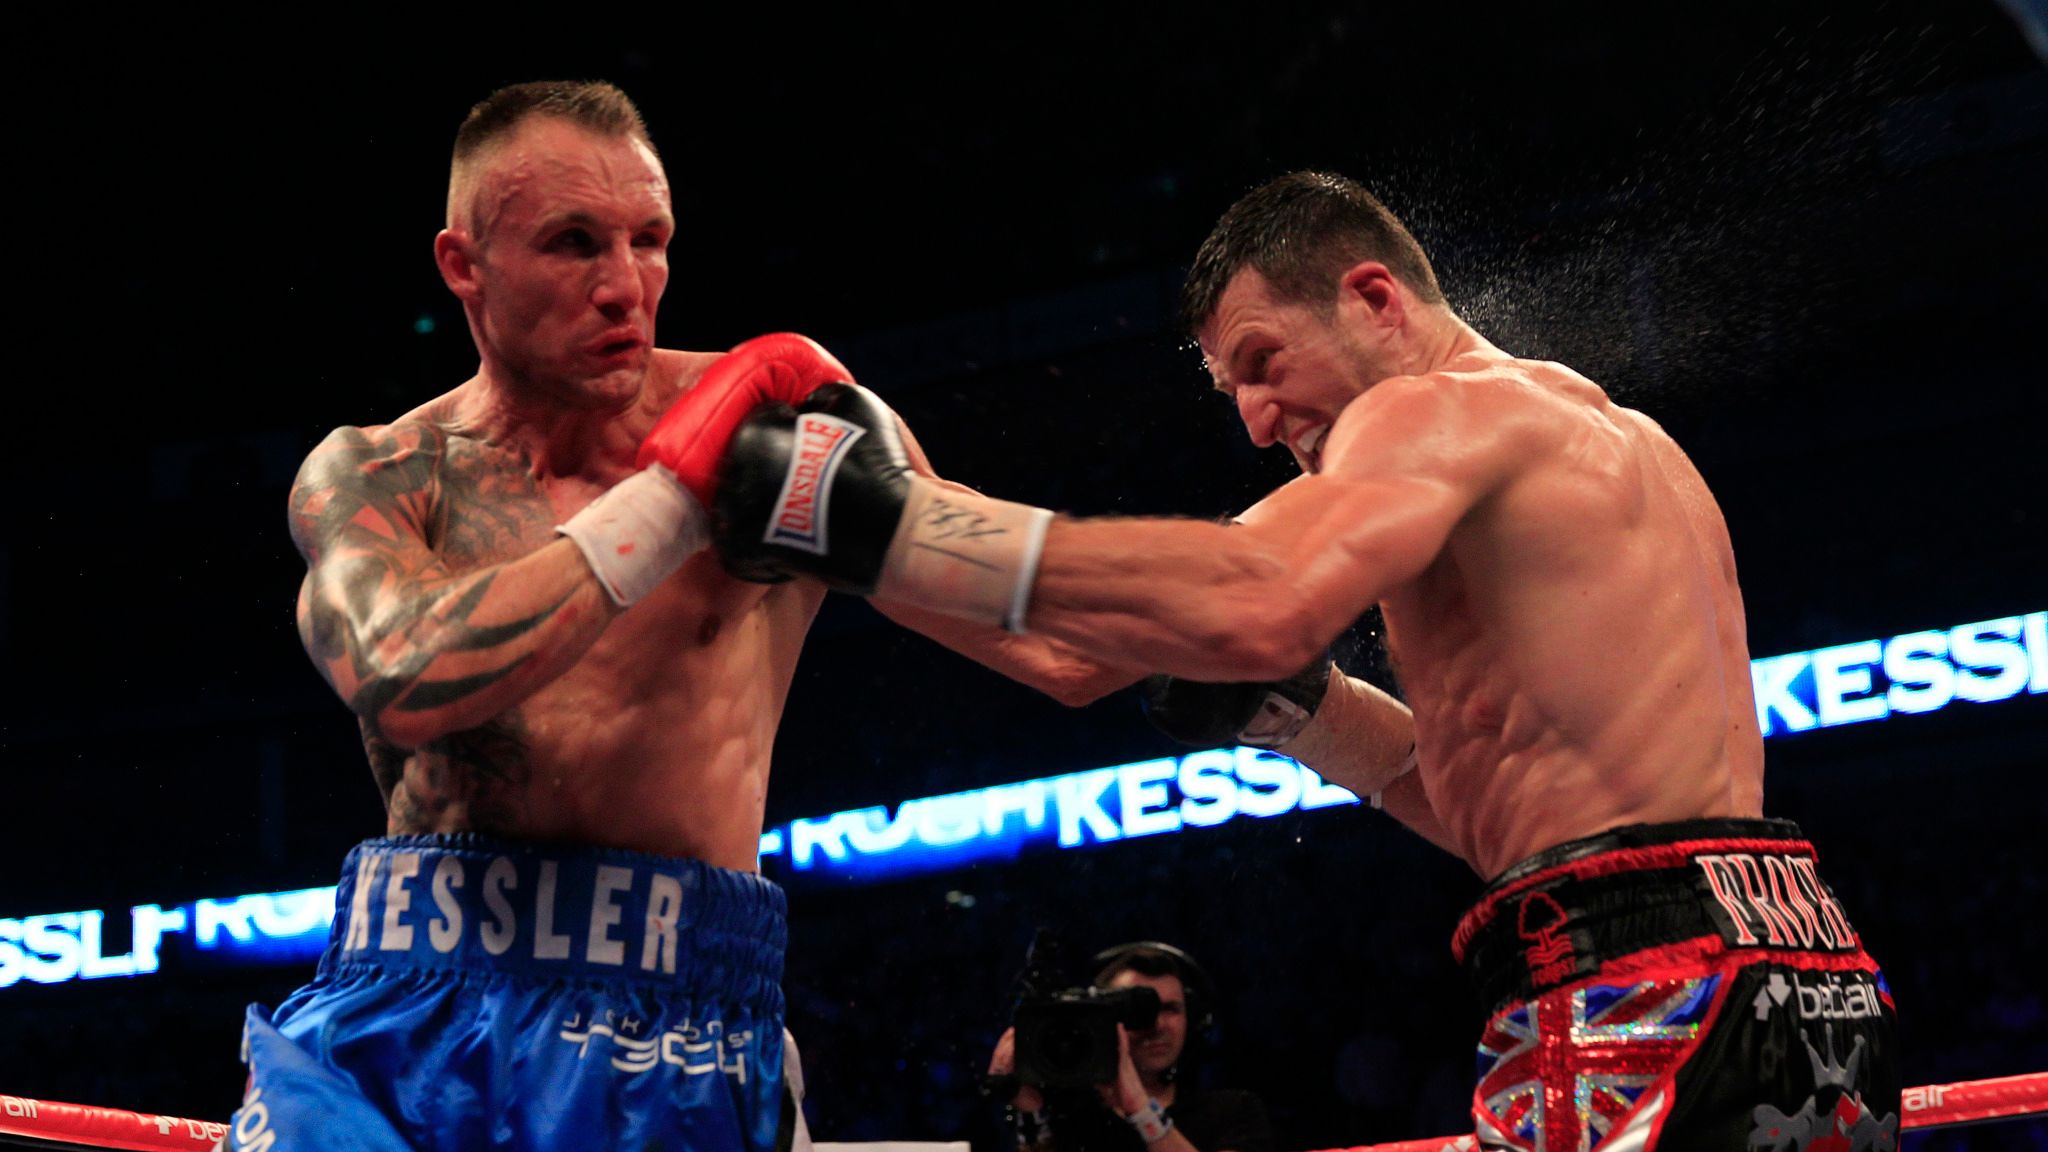 Hall of Famer Froch: My top five best fights